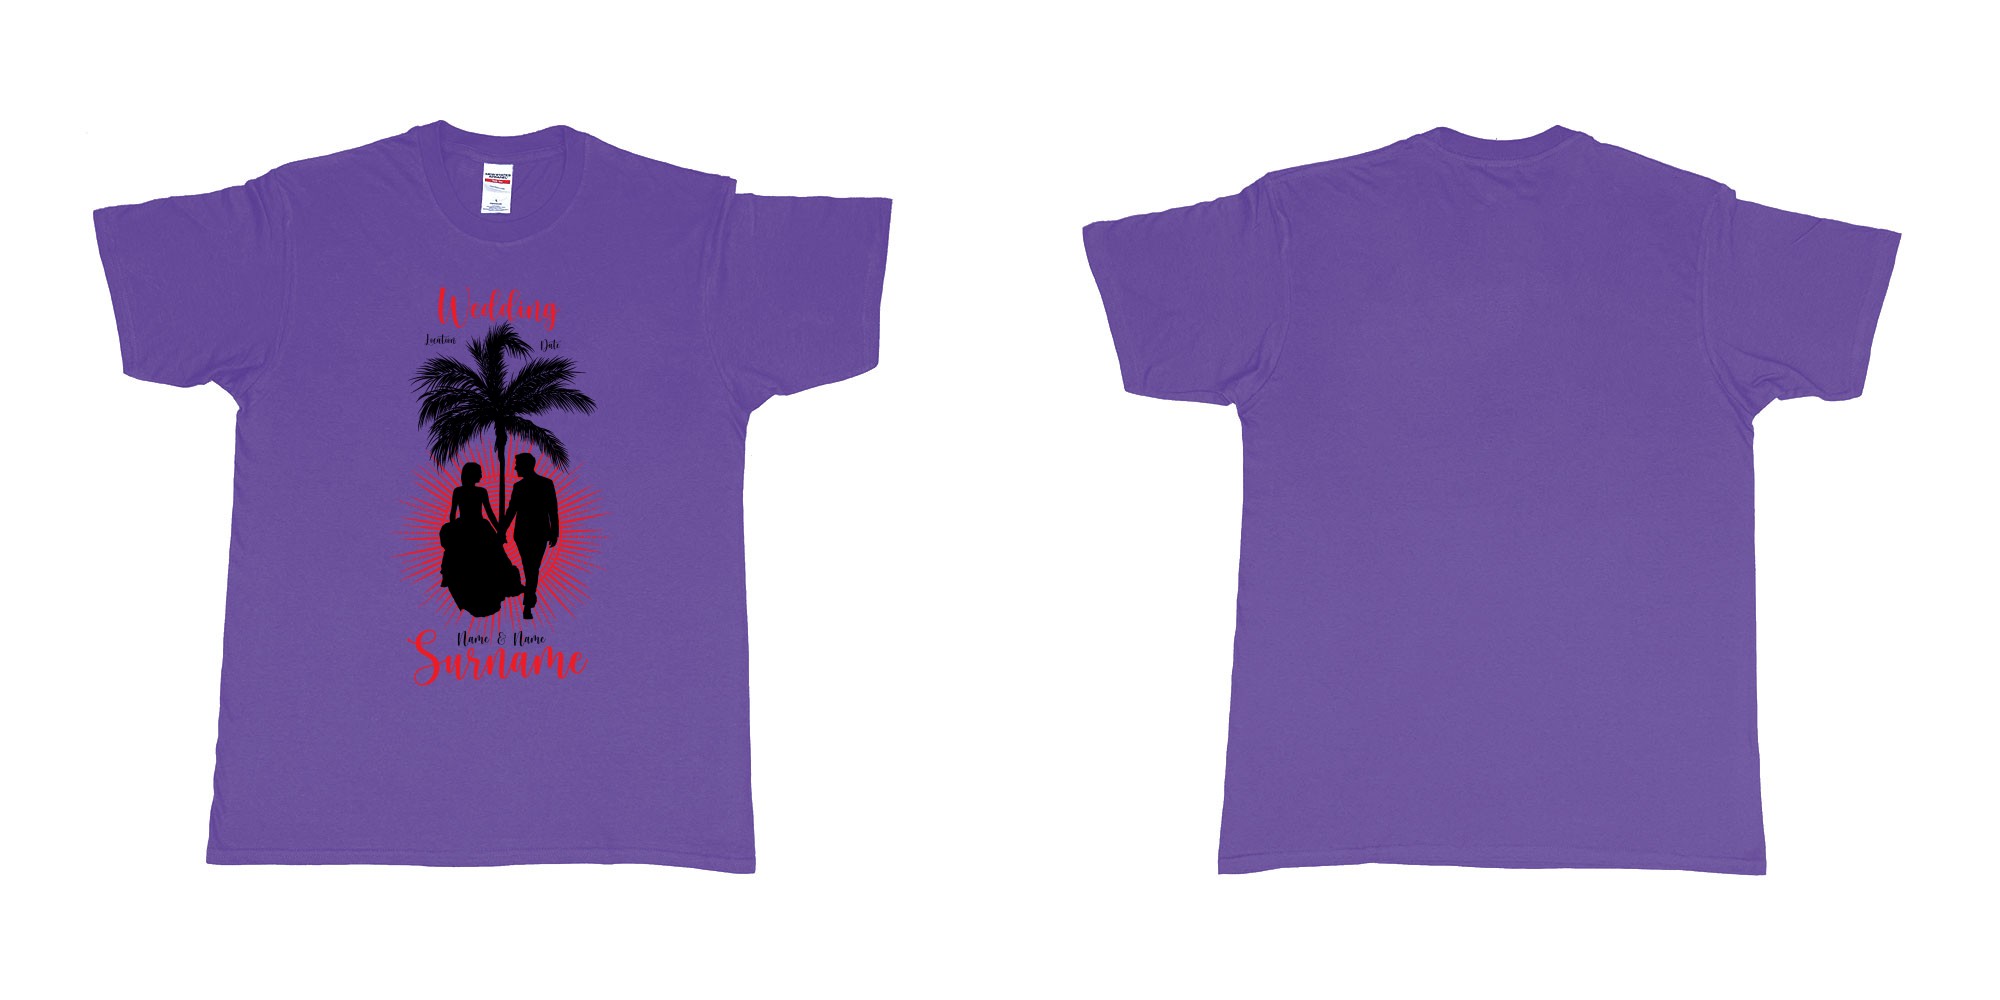 Custom tshirt design wedding palm sun bali in fabric color purple choice your own text made in Bali by The Pirate Way